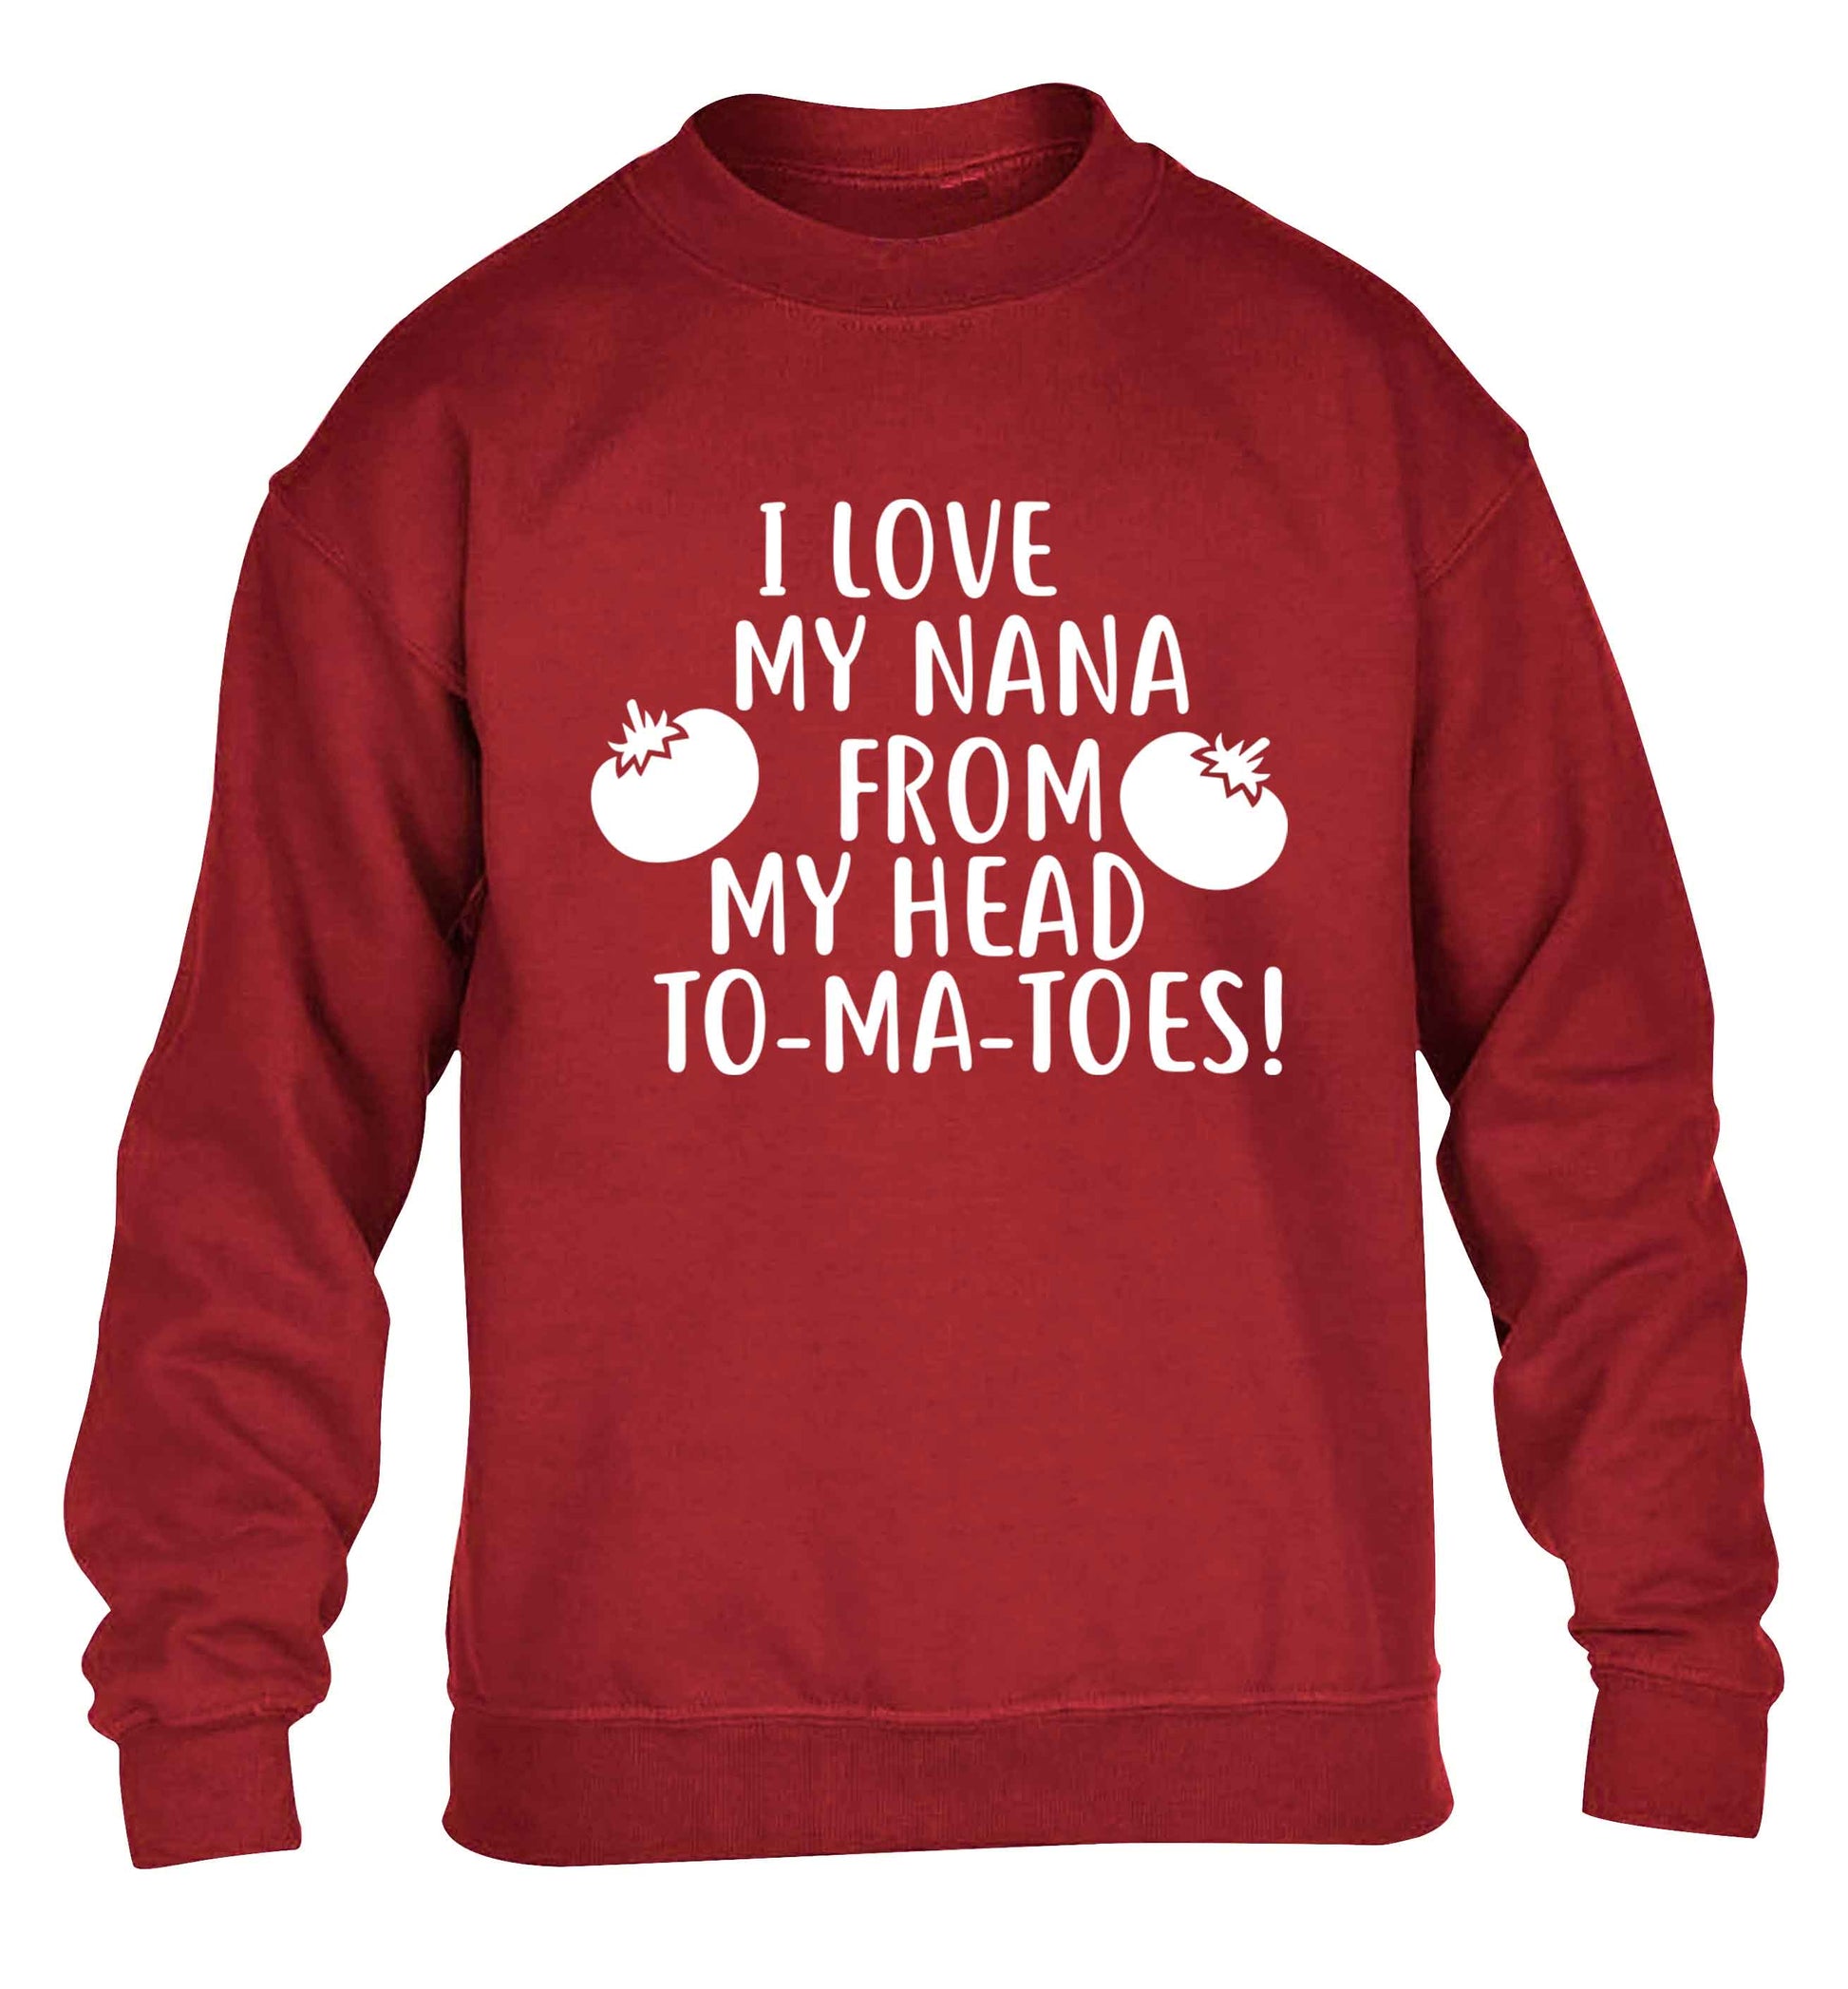 I love my nana from my head to-ma-toes children's grey sweater 12-13 Years